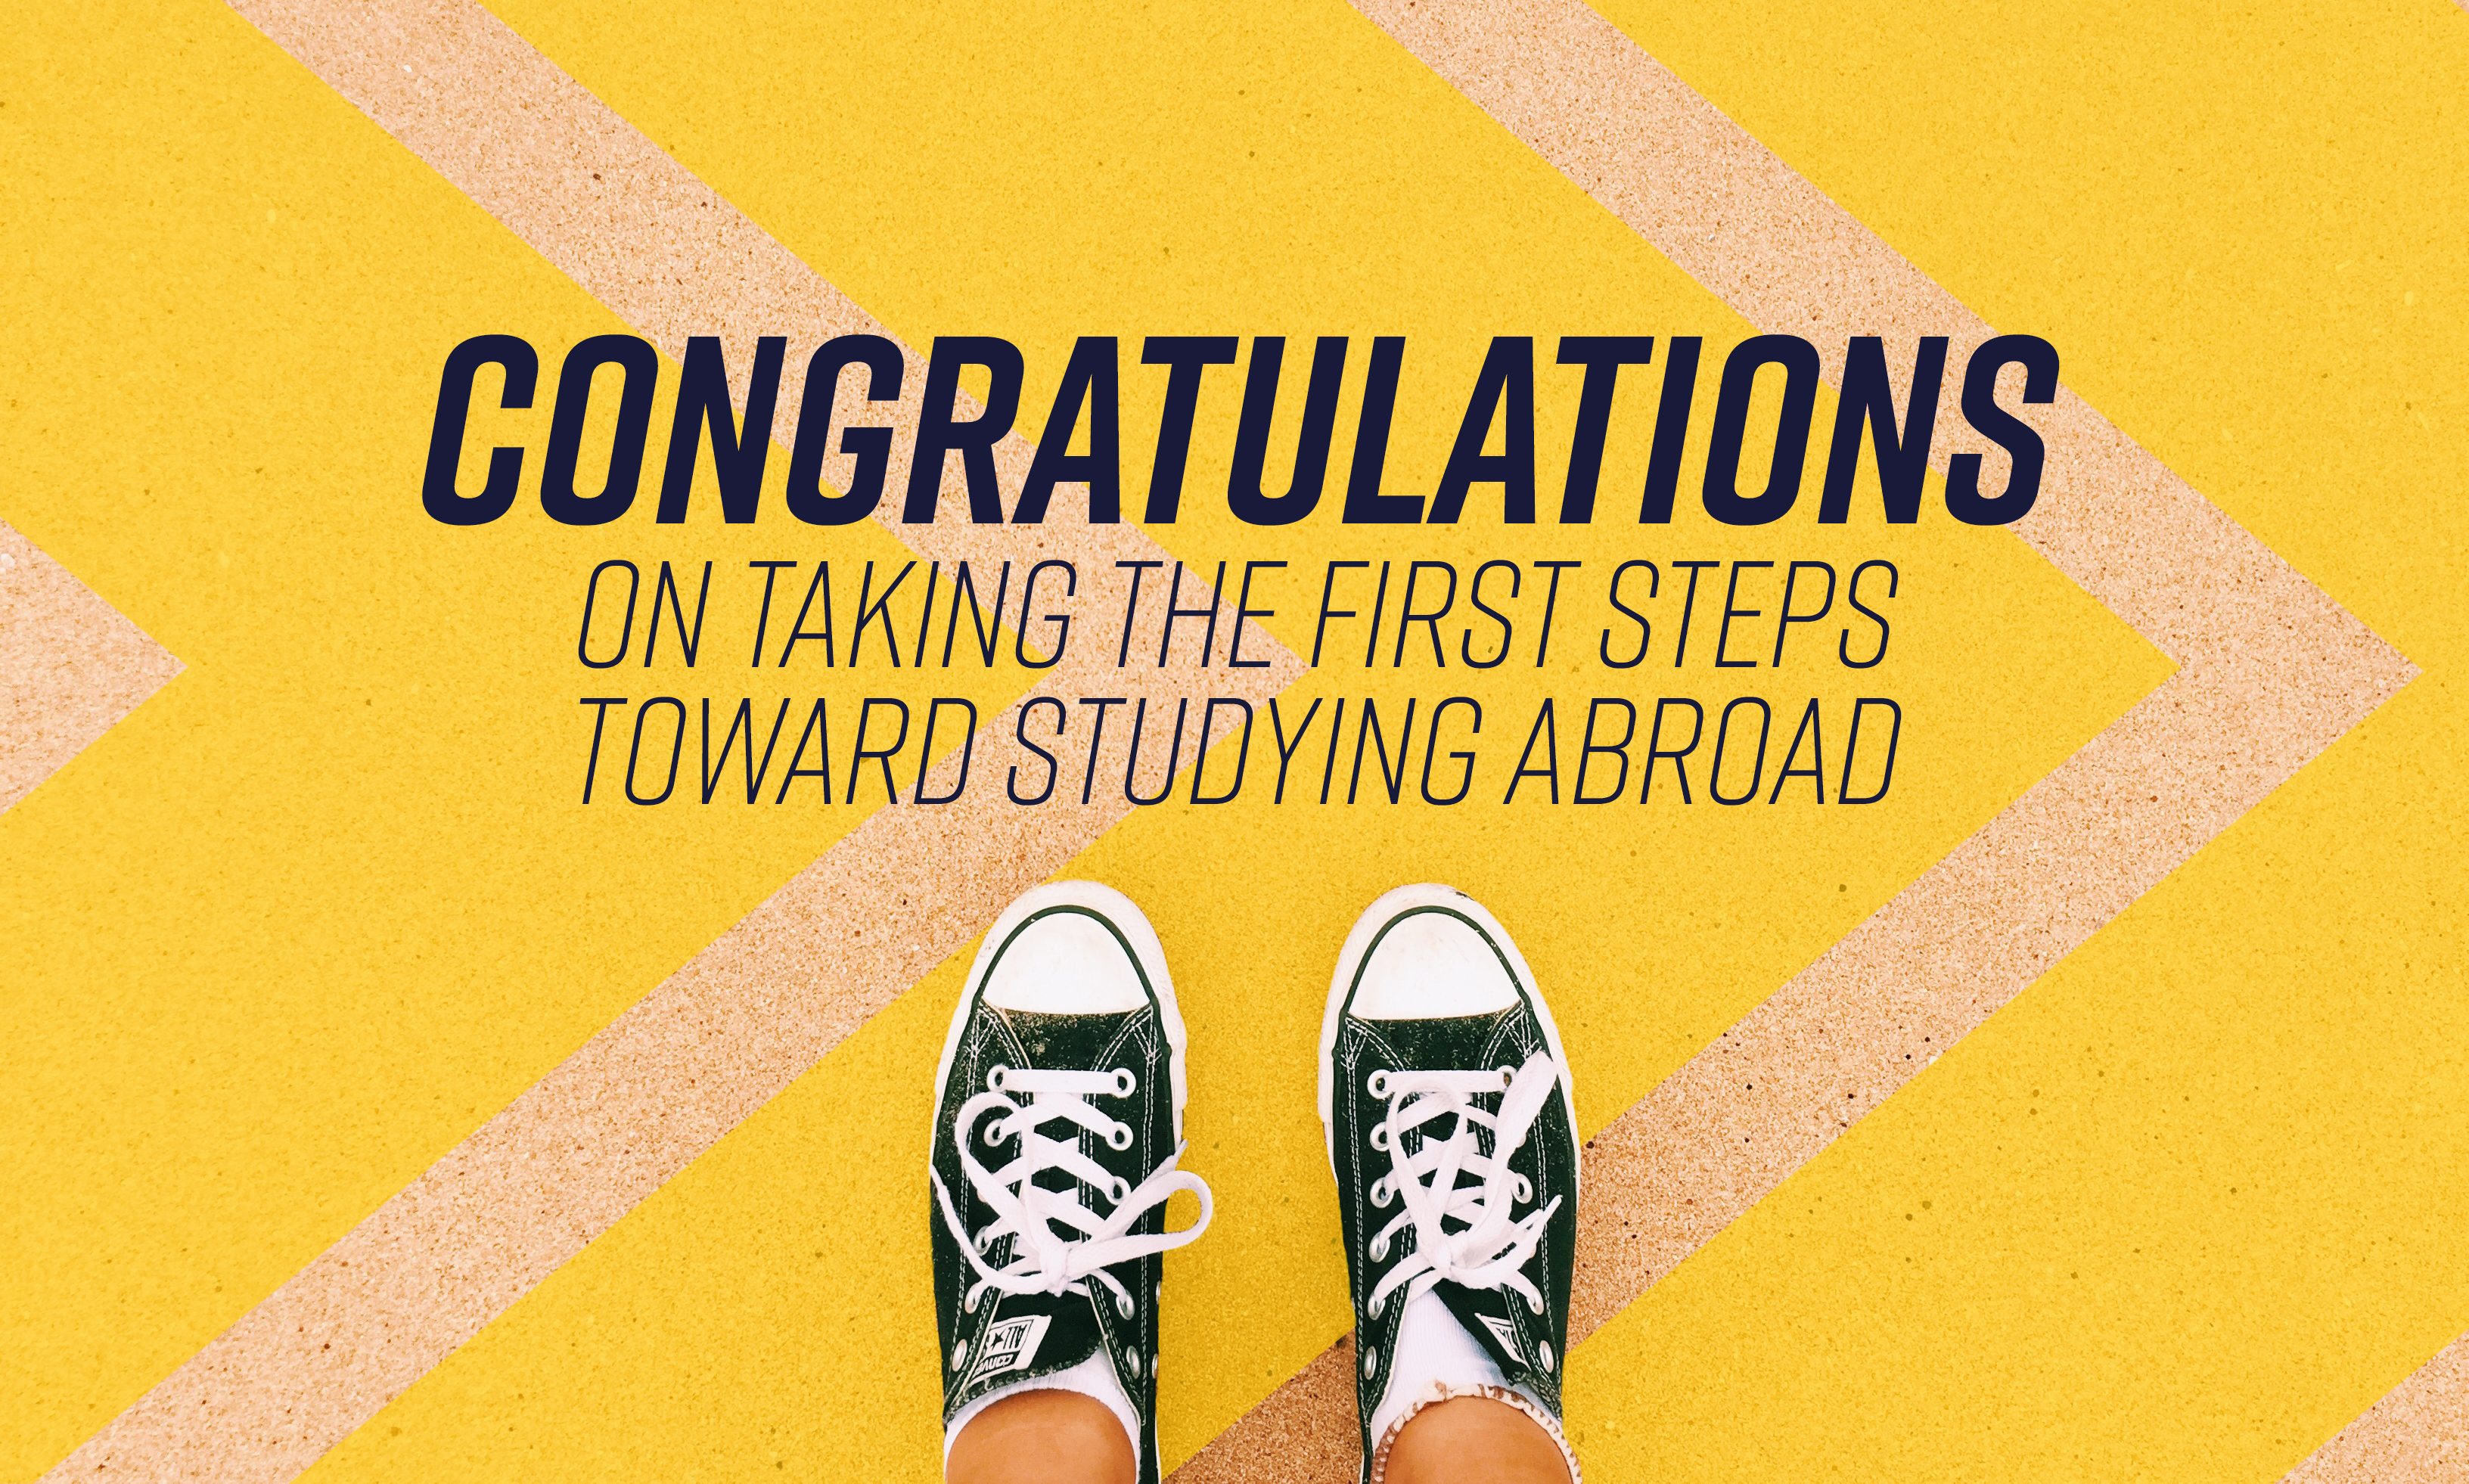 Congratulations on taking the first steps toward studying abroad